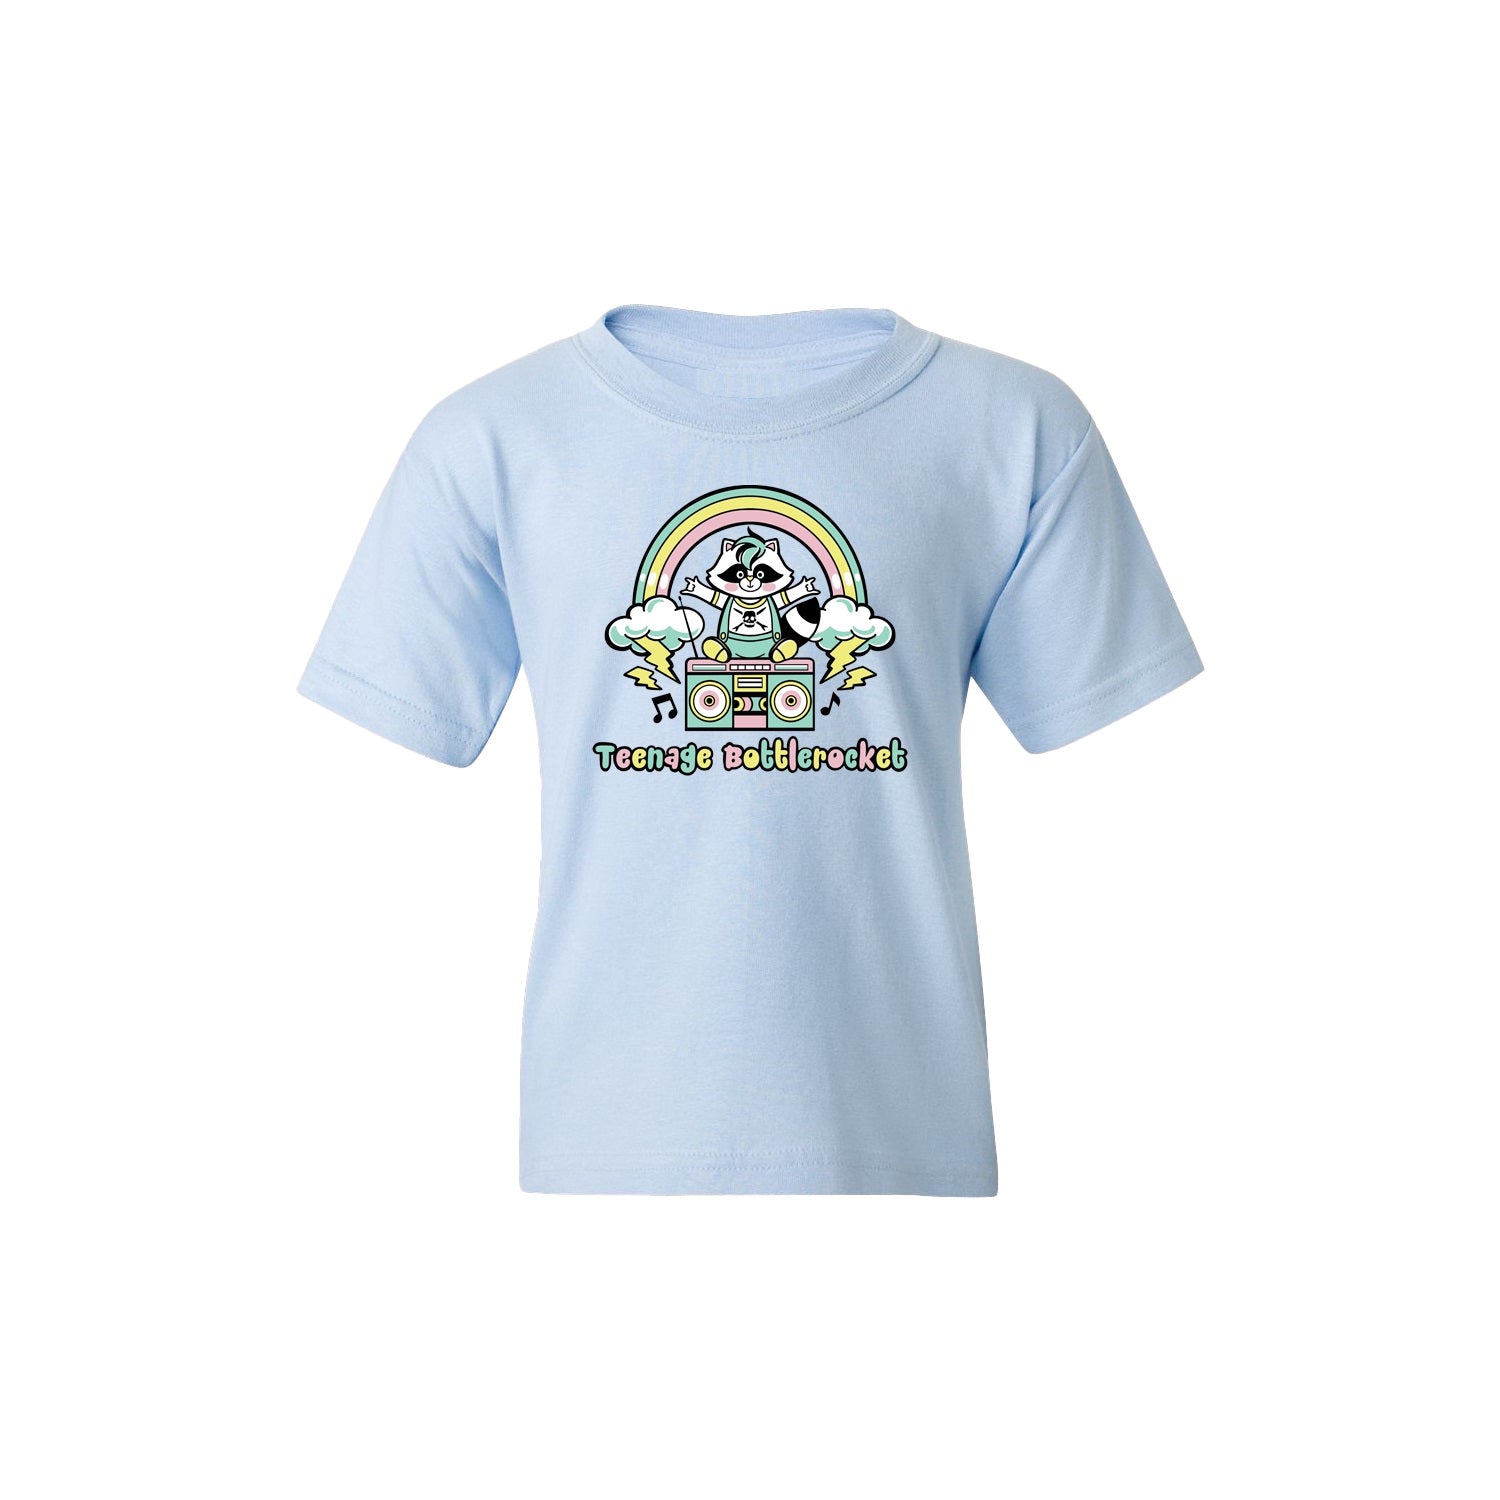 Image of a light blue tshirt against a white background. The center of the shirt has a colorful graphic of a raccoon sitting on top of a boombox. There is a rainbow with clouds at the end of the rainbow, shooting lightning bolts out. This is above the raccoon's head. Below the boombox in blue, pink, and yellow alternating colors are the words teenage bottlerocket. There are black music notes coming out of the sides of the boombox.